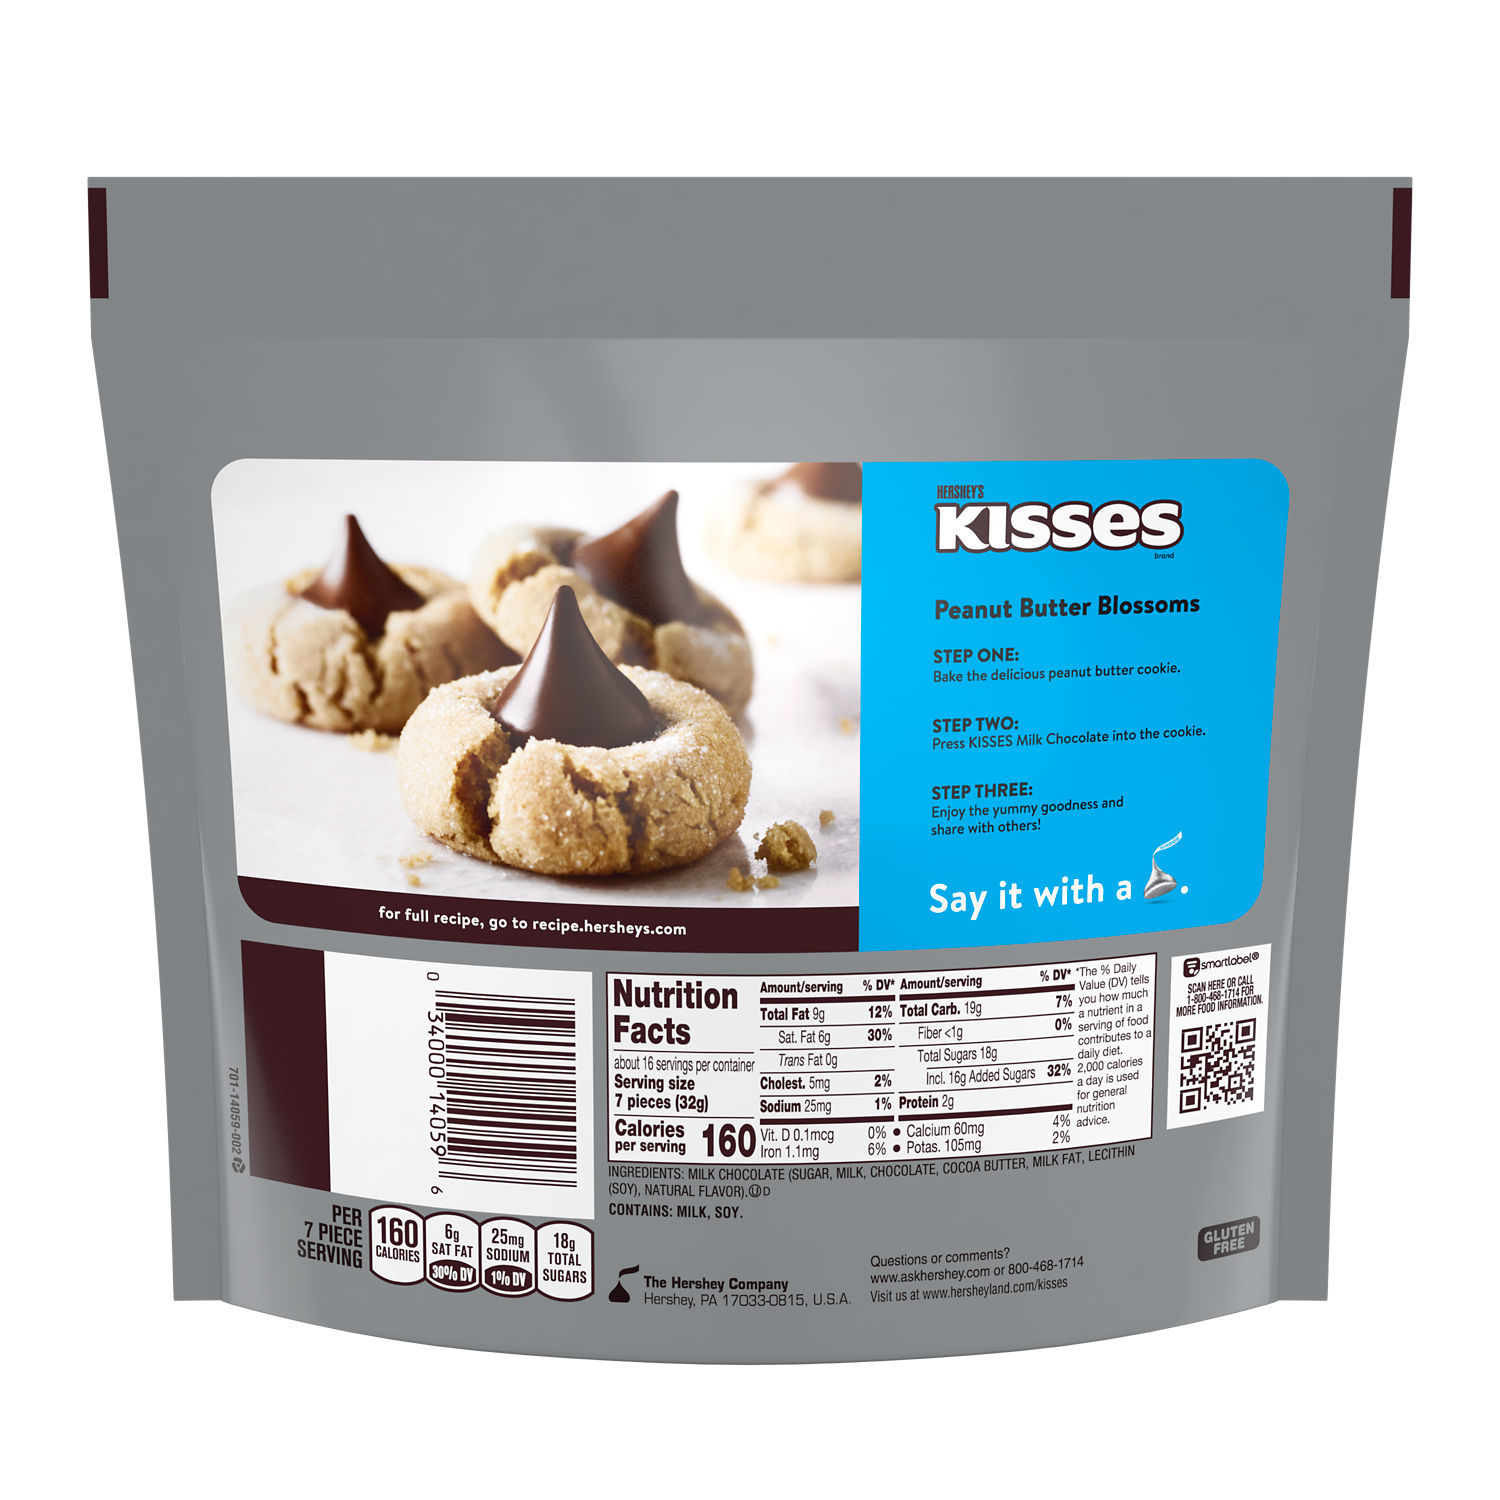 Hershey's Kisses Milk Chocolate Candy, Family Pack 17.9 oz - image 3 of 9